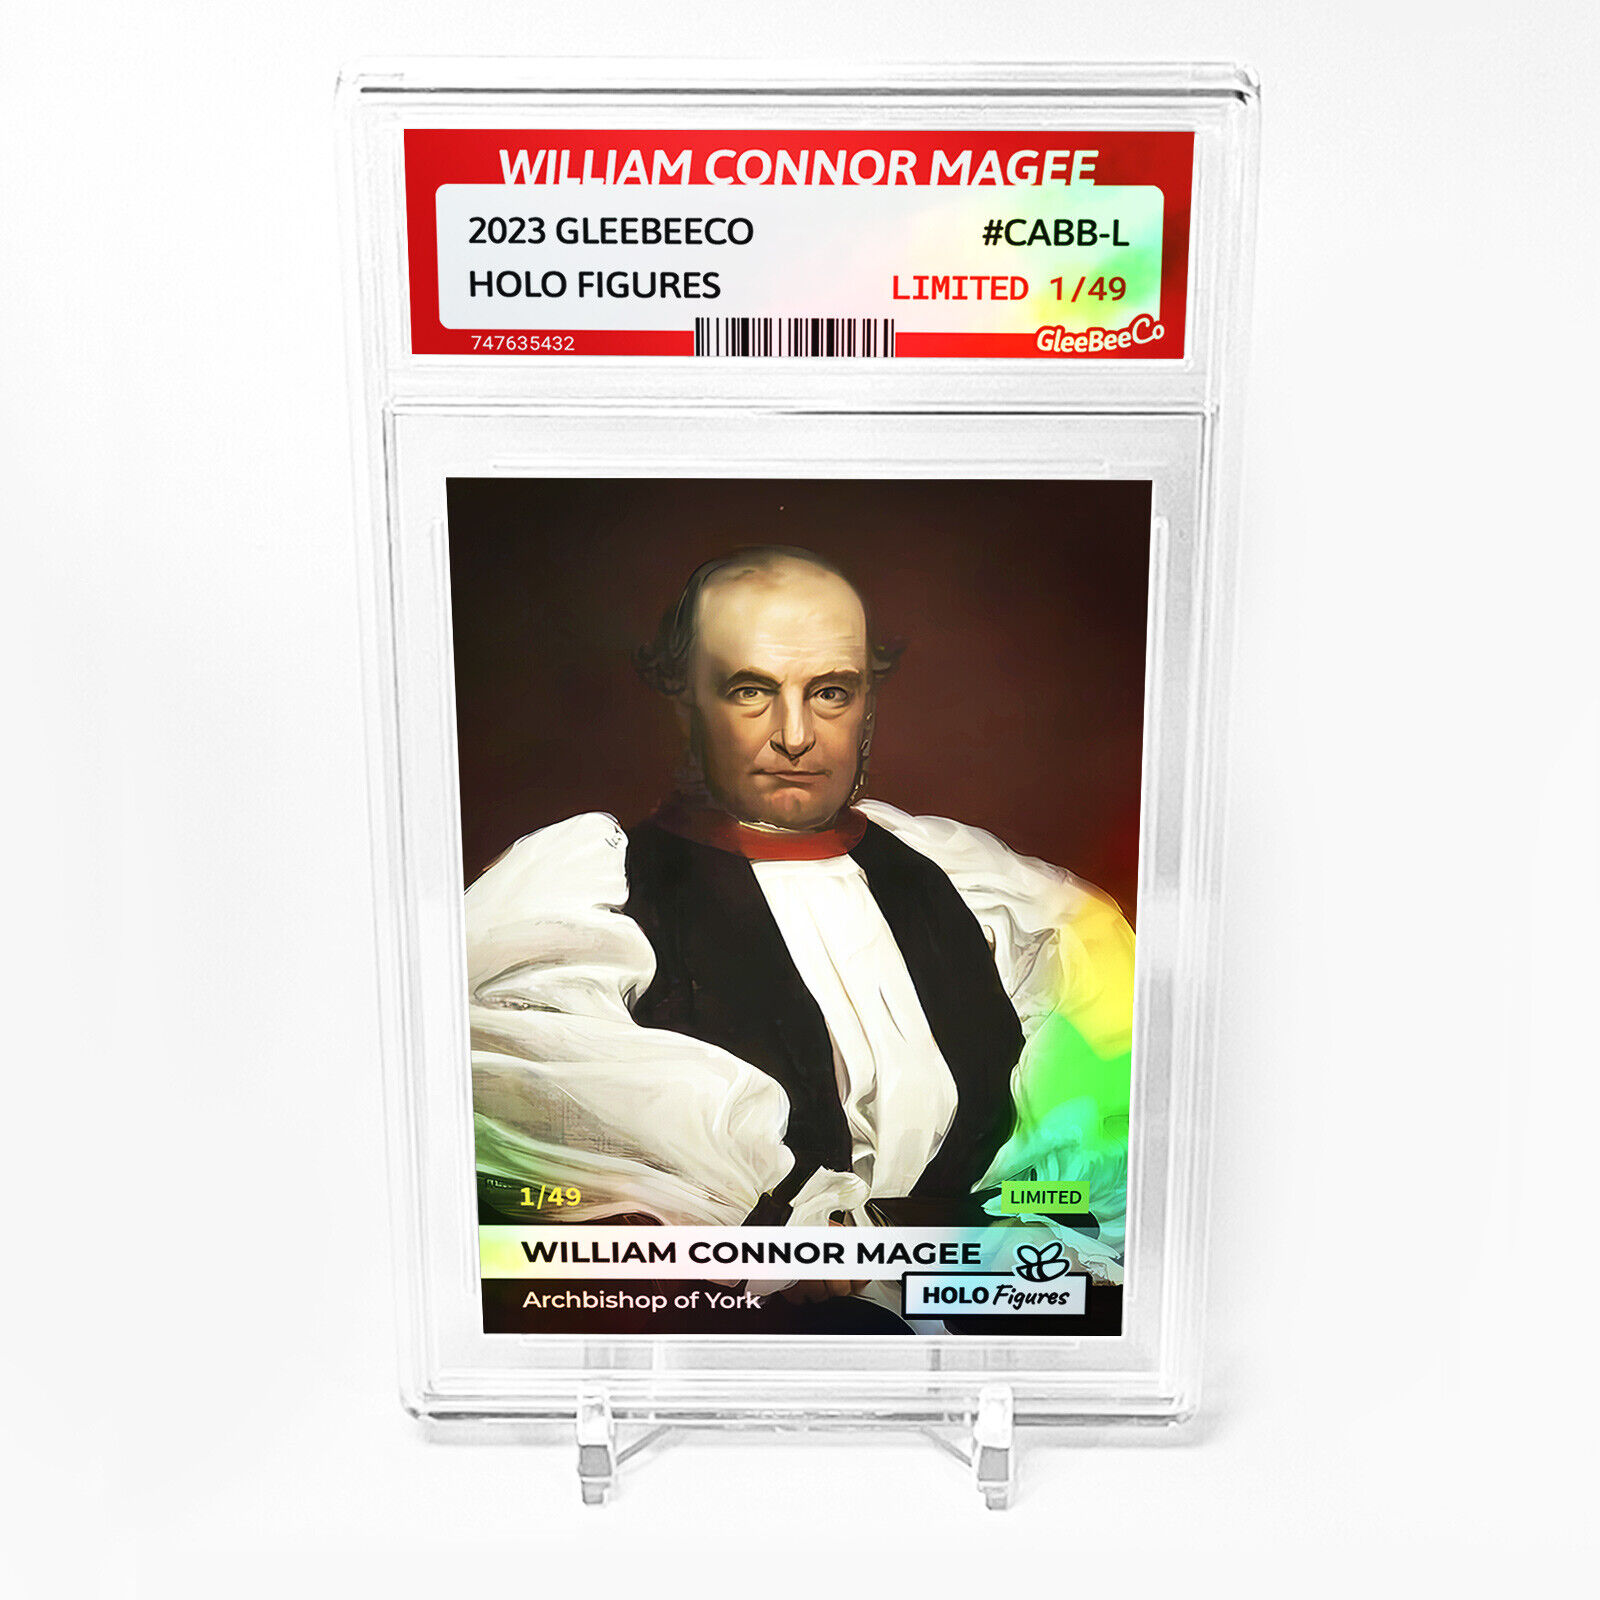 WILLIAM CONNOR MAGEE Card 2023 GleeBeeCo Holo Figures #CABB-L /49